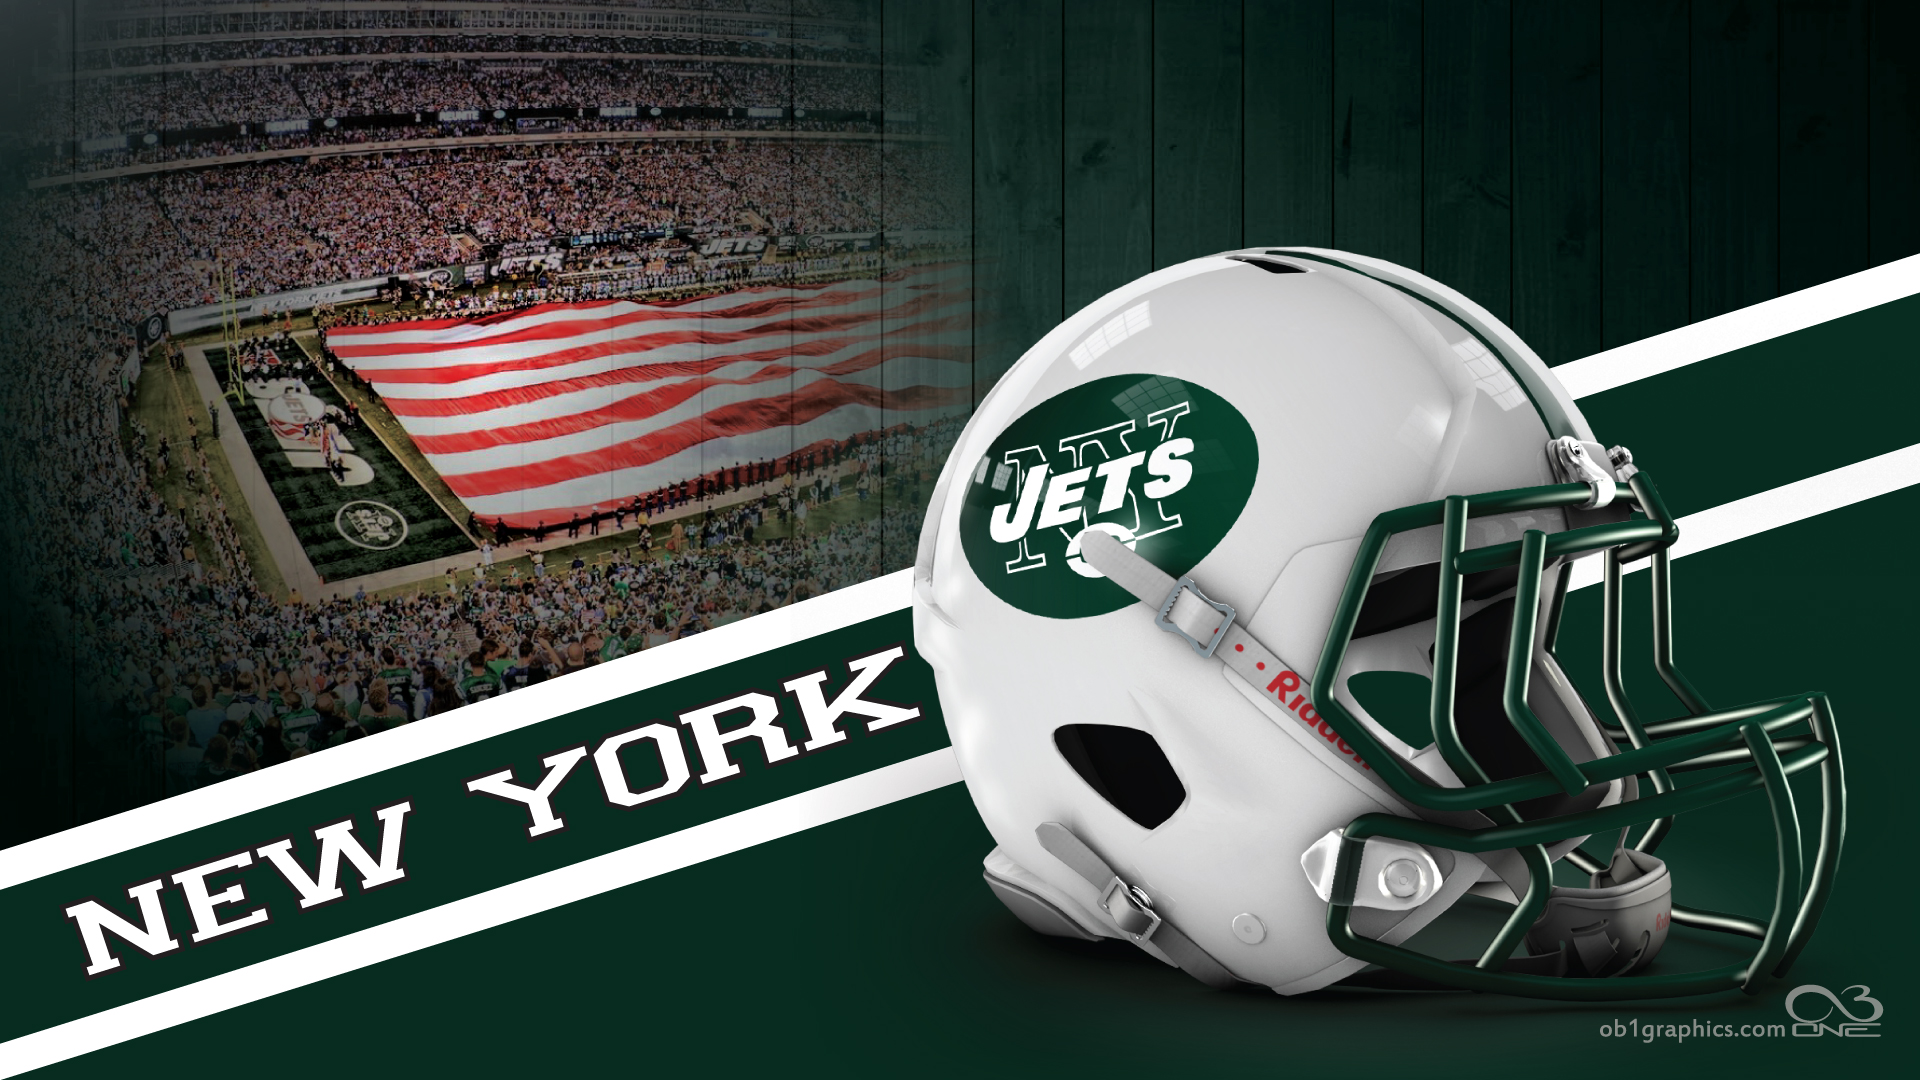 An Awesome Image Of New York Jets Wallpaper